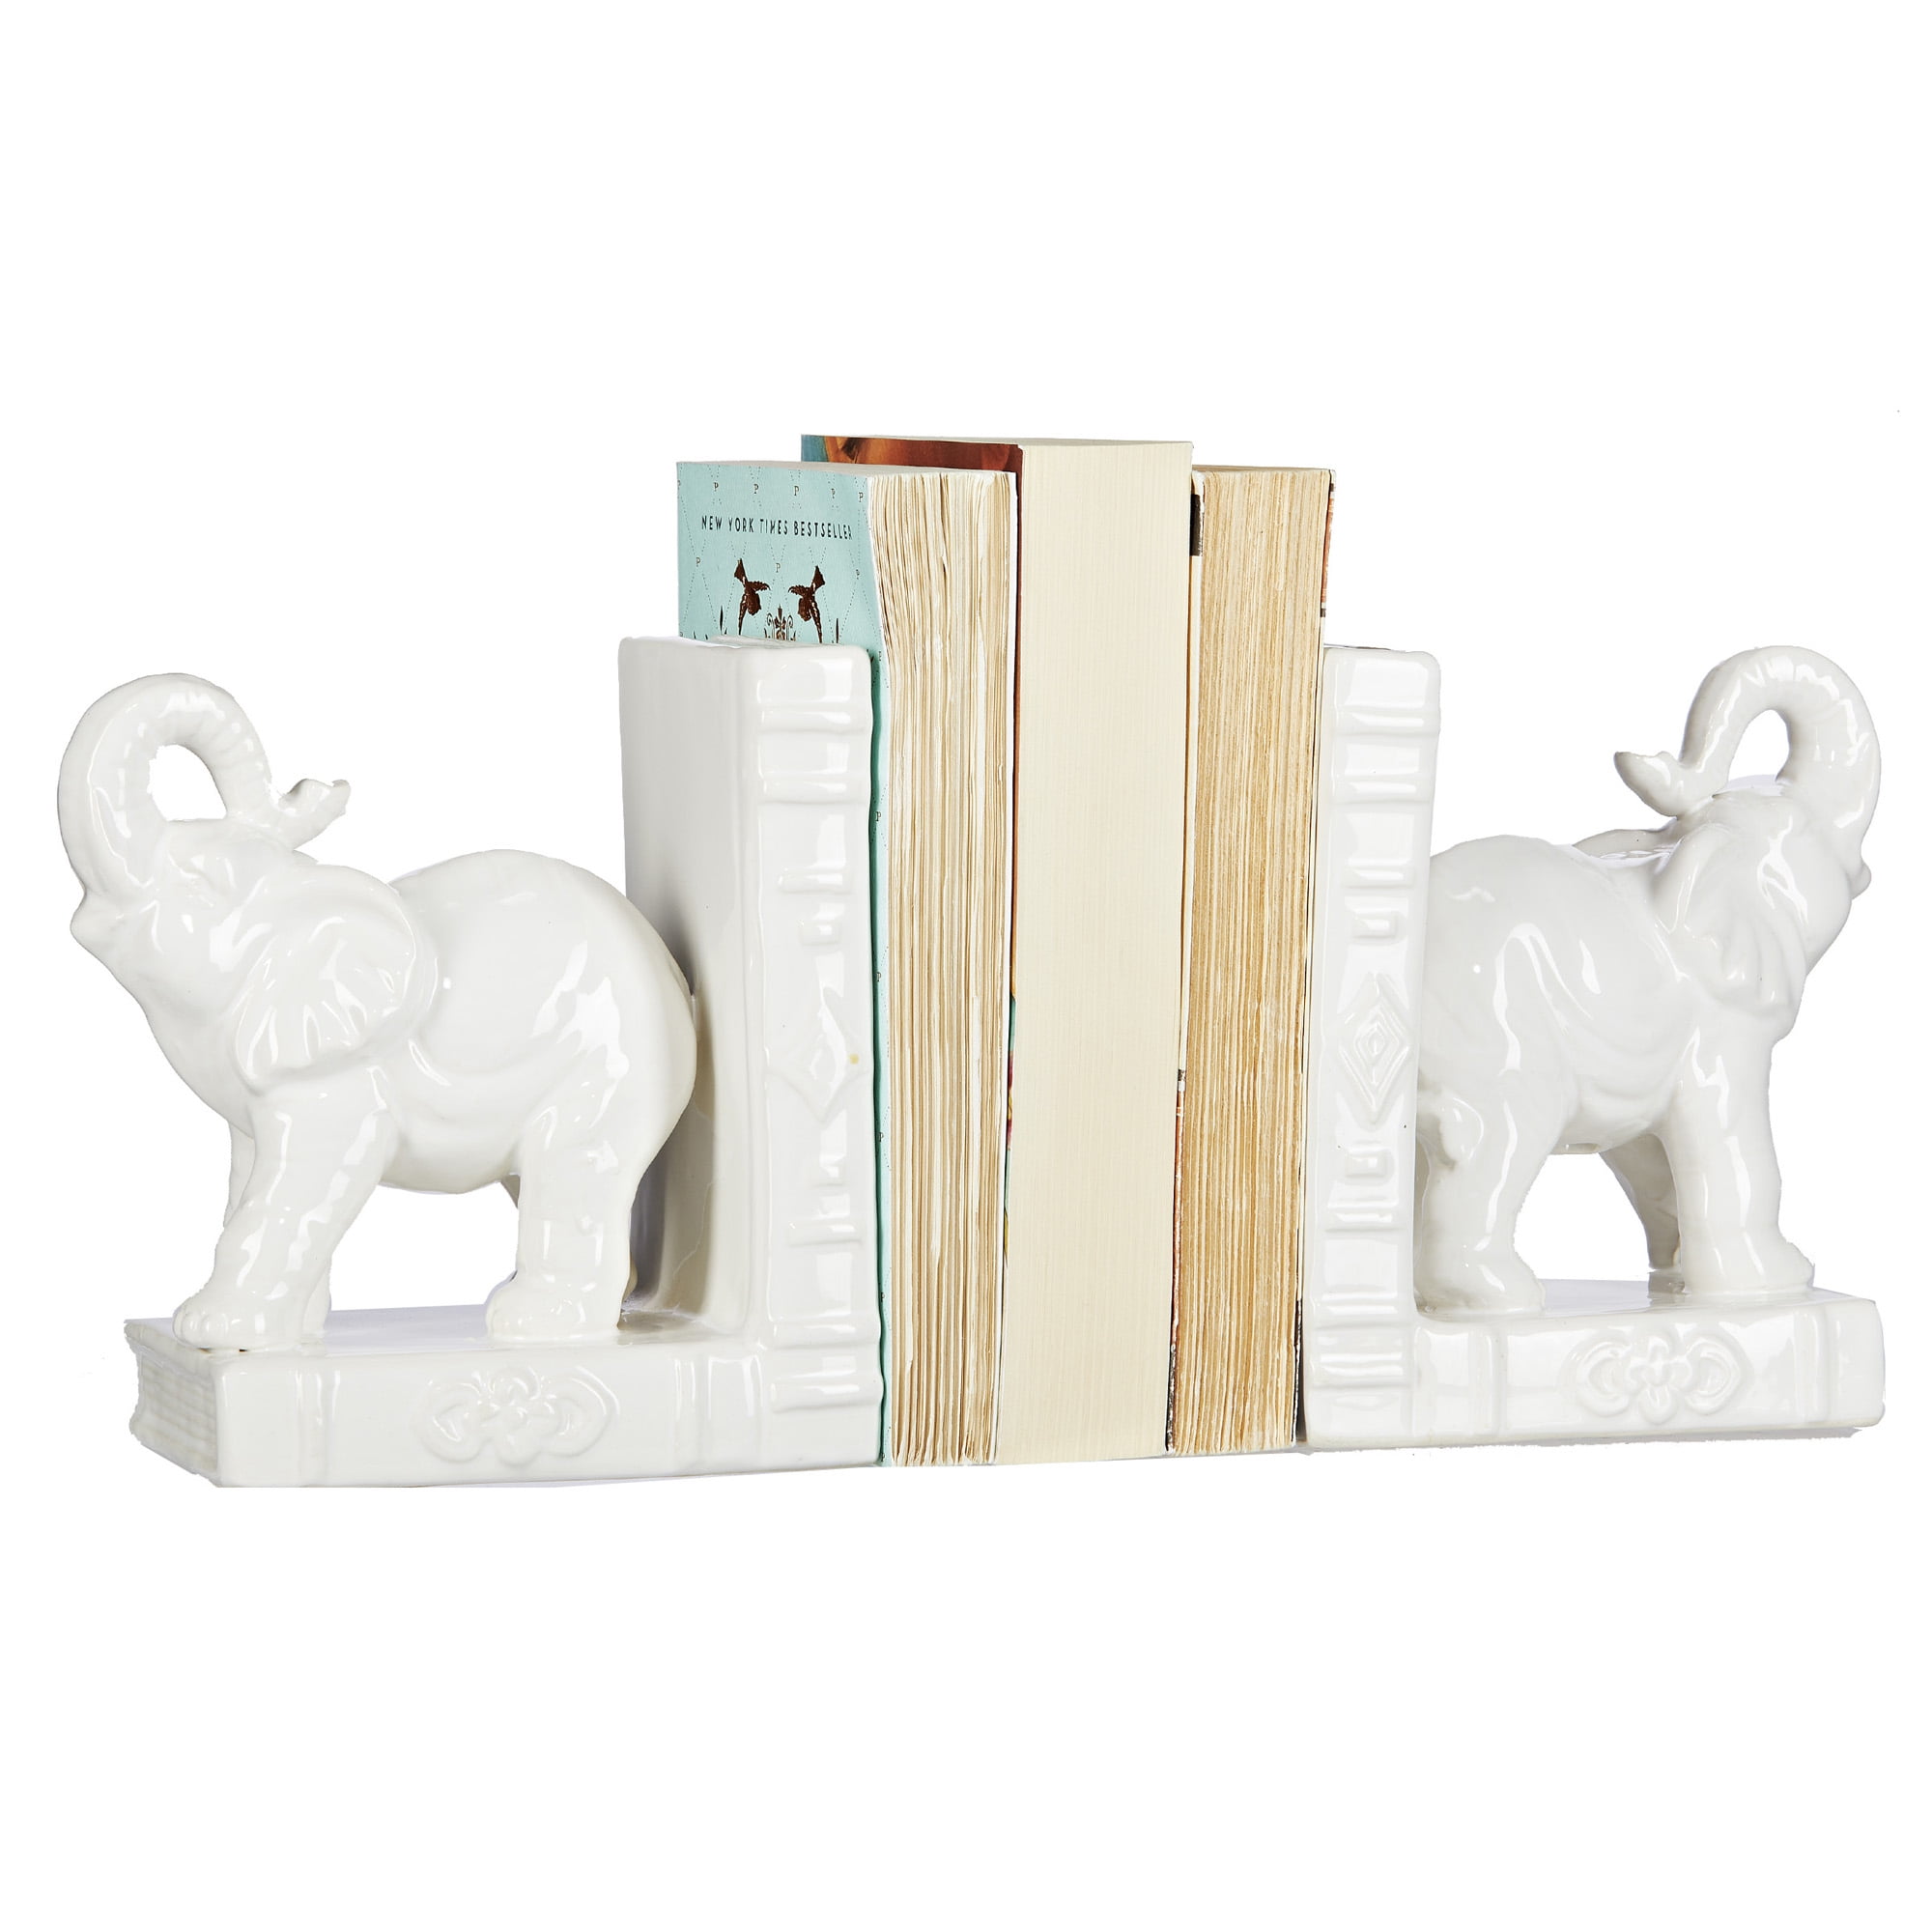 Itian Cute Elephant Bookends Nonskid Art Bookend Gift Blue 1 Pair 